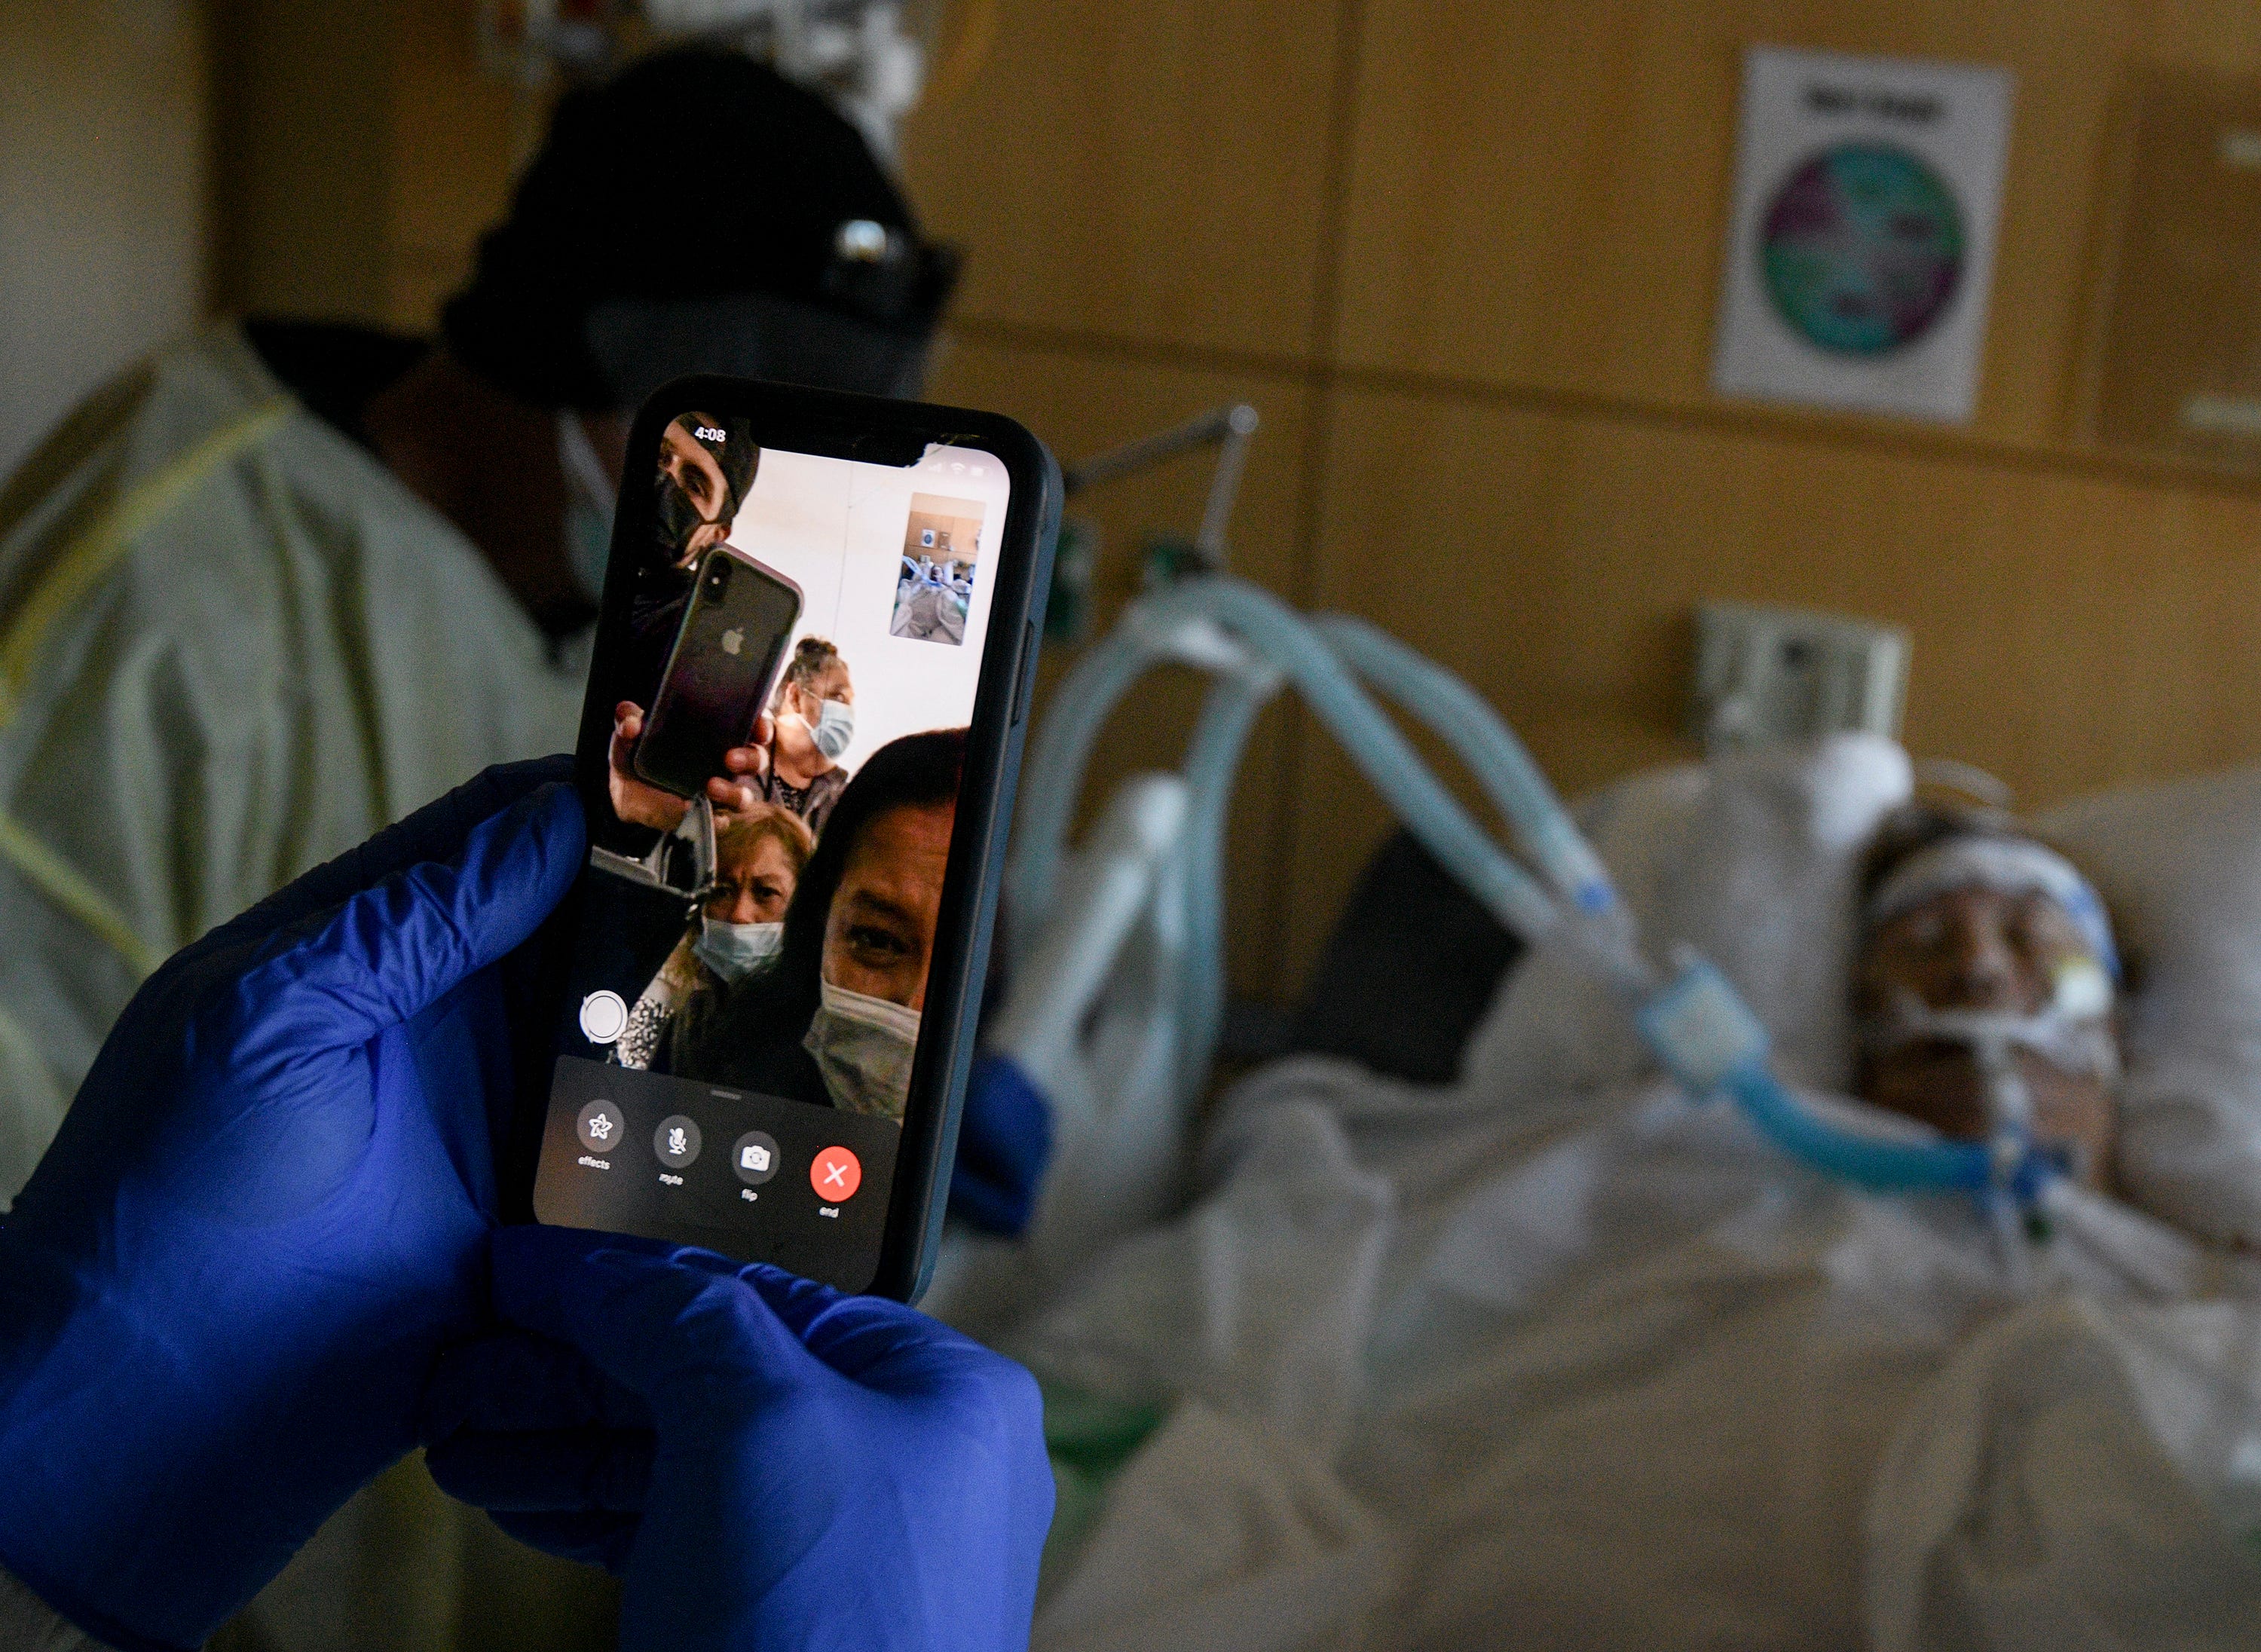 Members of the Dominguez family talk to Etelvina Dominguez, 78, via a smartphone on Friday, Feb. 12, 2021, at Providence Holy Cross Medical Center in Los Angeles. Due to the COVID-19 pandemic, family visits are allowed only in special cases, but they can visit by video calls. Etelvina spent more than 30 days in the hospital battling COVID-19 and passed away a day after her eldest son and husband visited her.